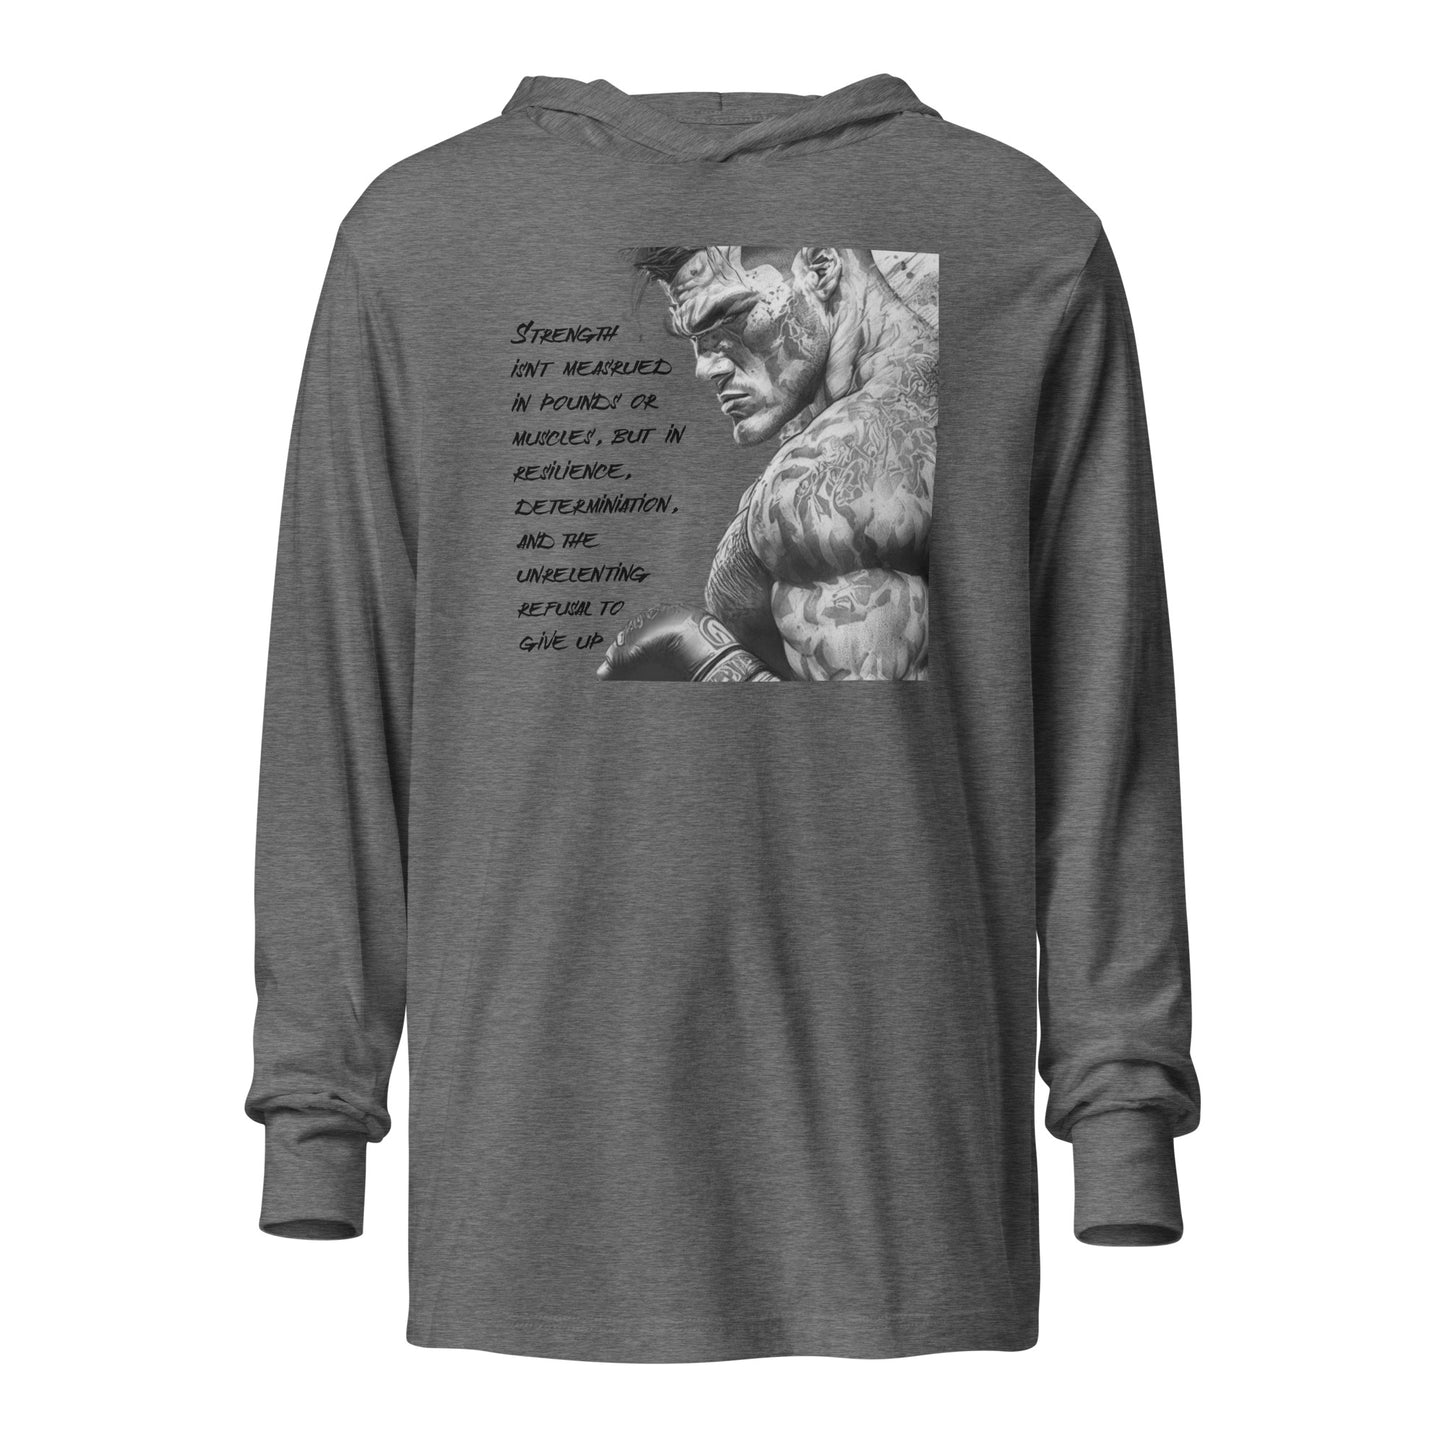 Strength and Determination Men's Hooded Long-Sleeve Tee Grey Triblend